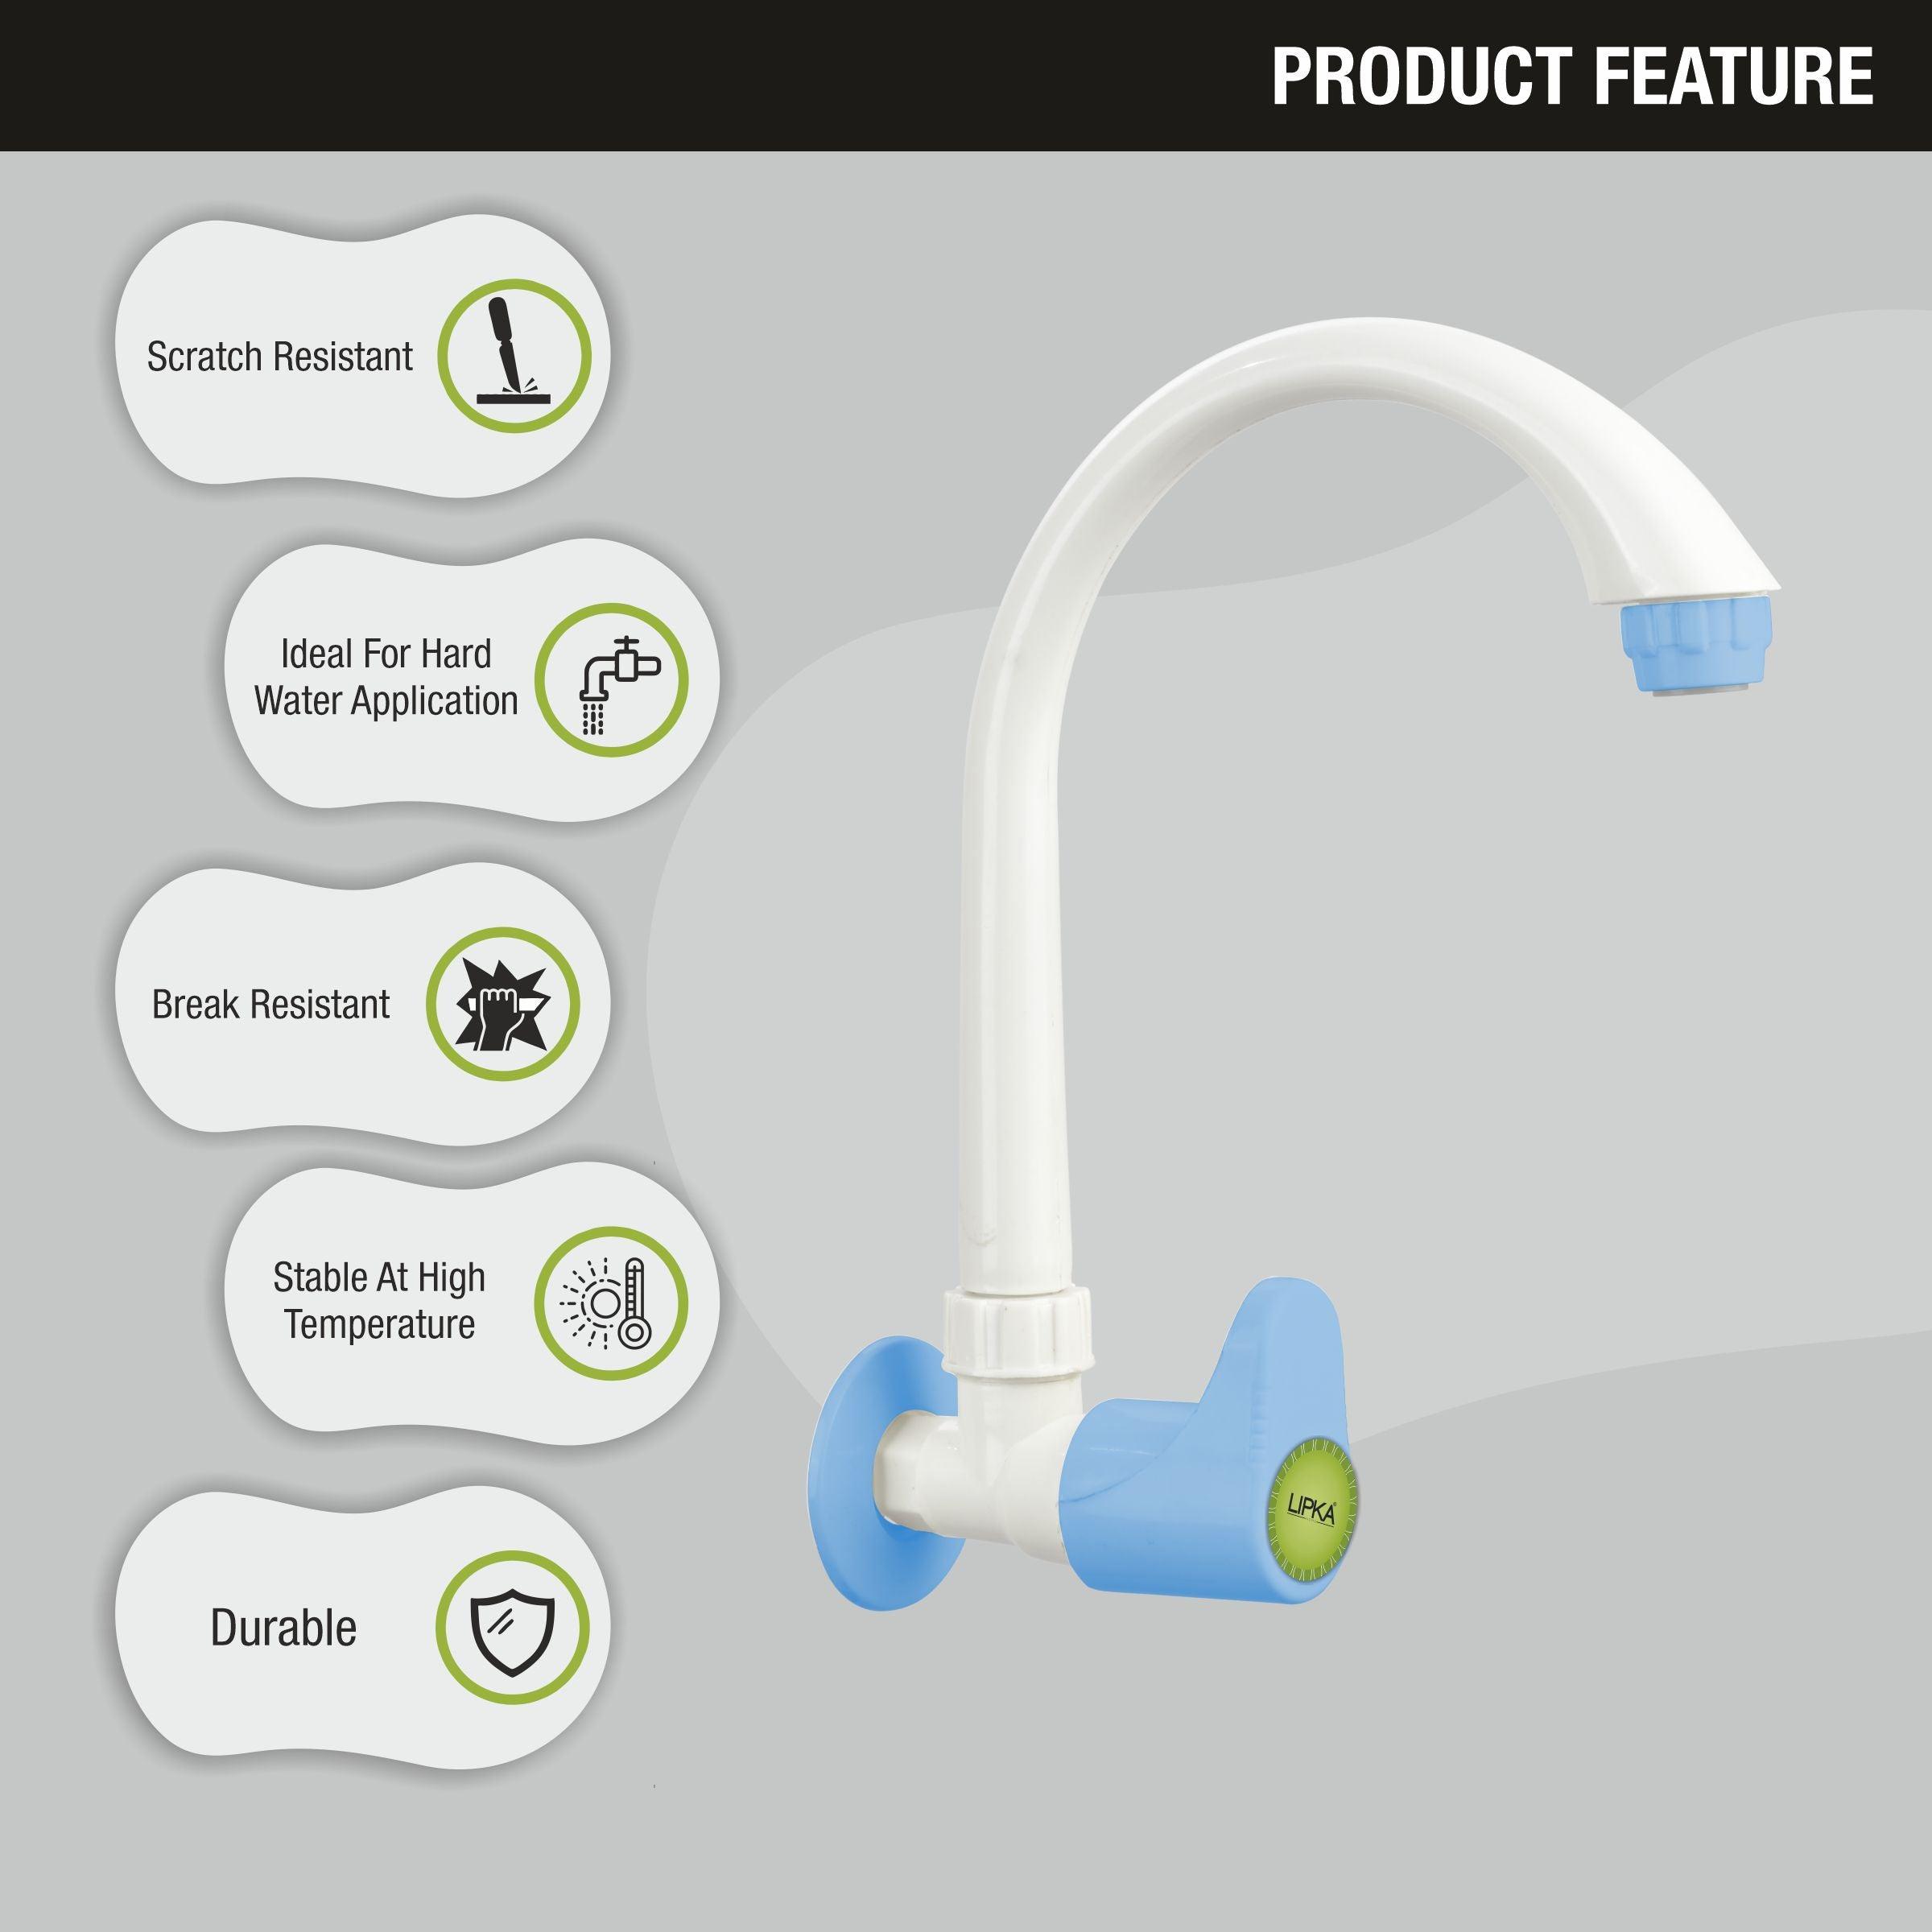 Glory PTMT Swan Neck Faucet features